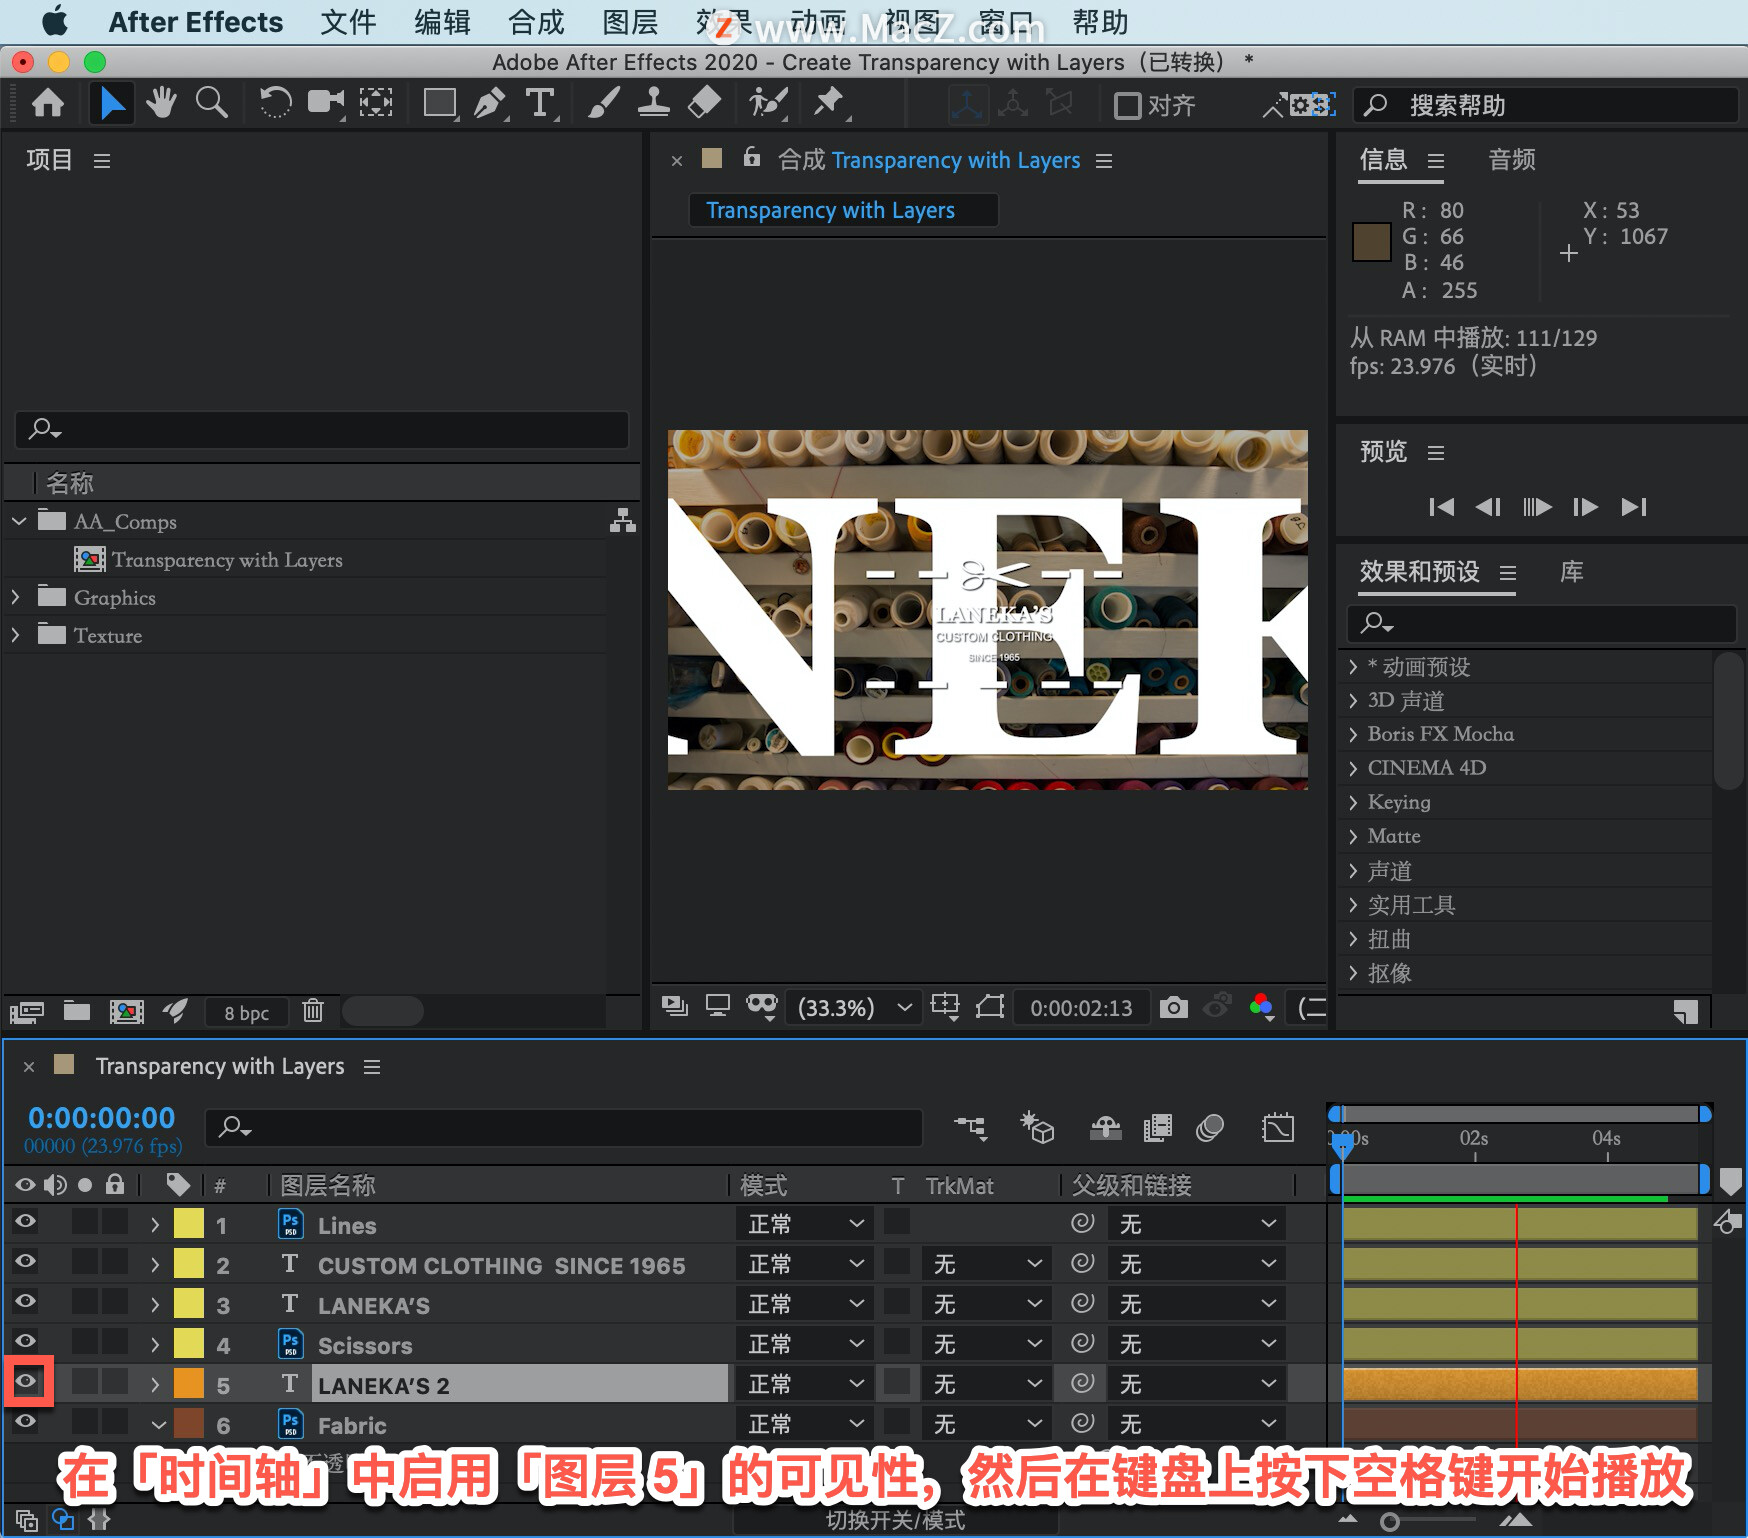 After Effects 教程「30」，如何在 After Effects 中使用图层创建透明效果？